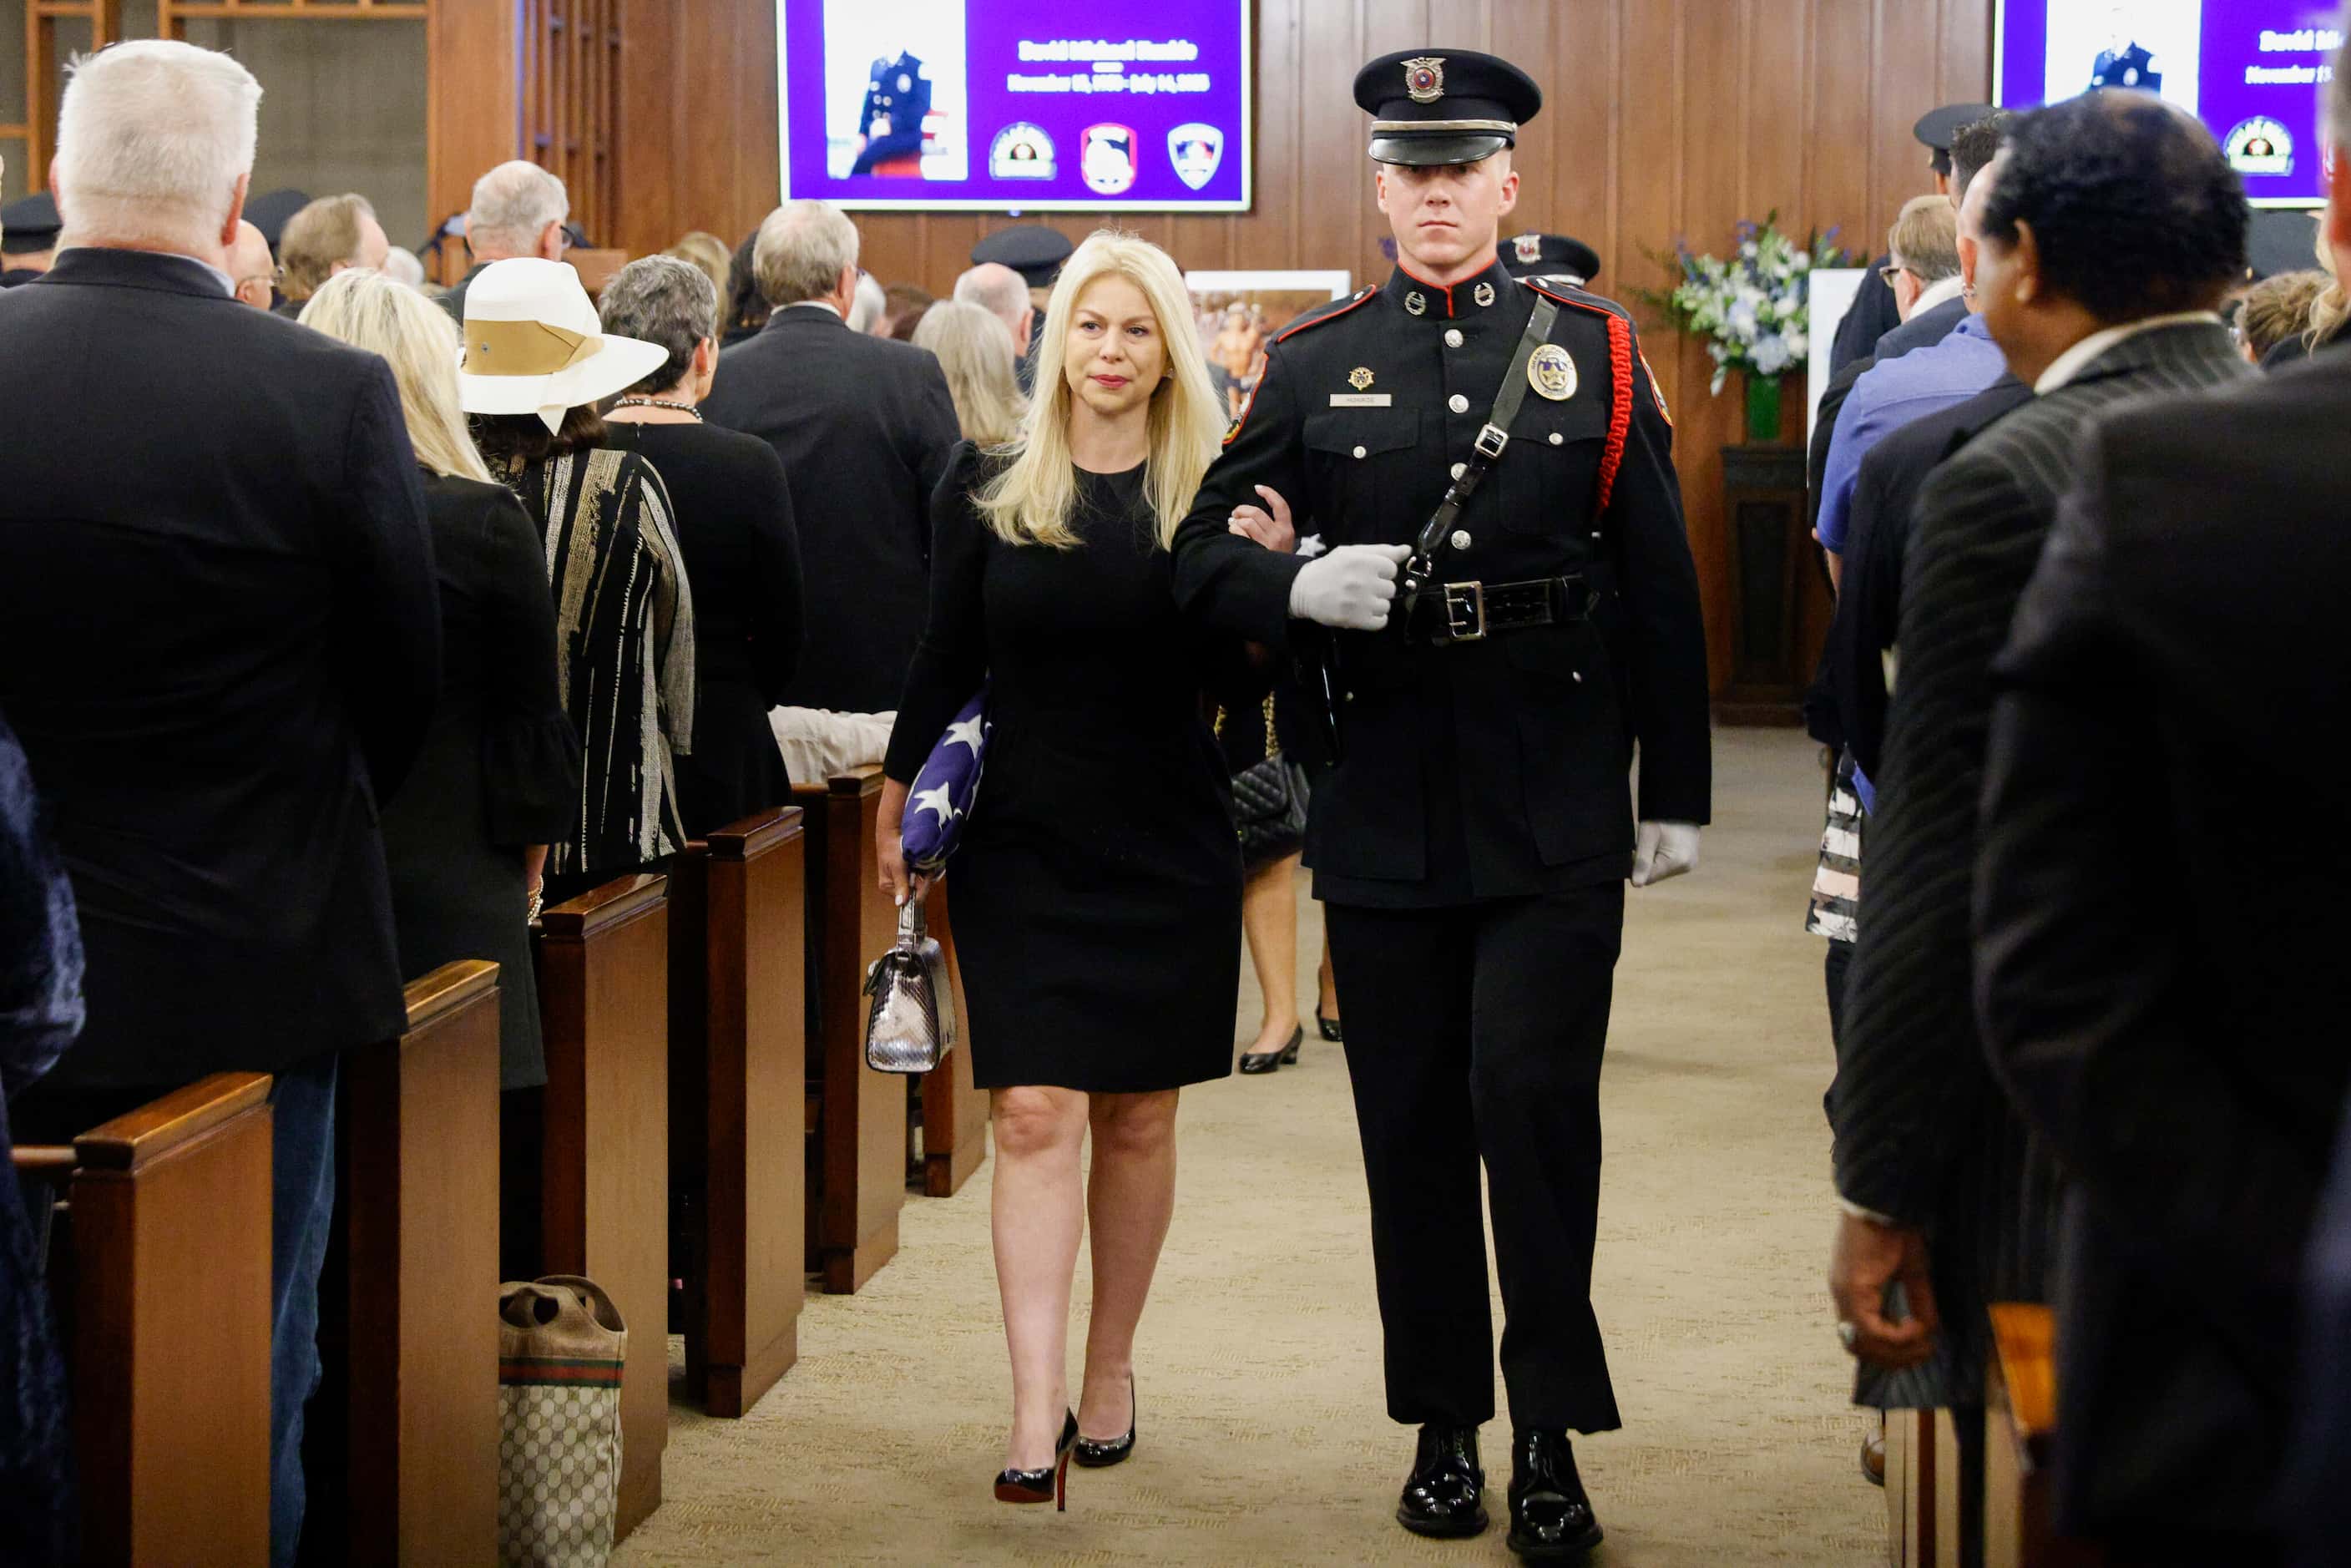 Sarah Dodd, David Kunkle’s wife, is escorted by a Grand Prairie police honor guard officer...